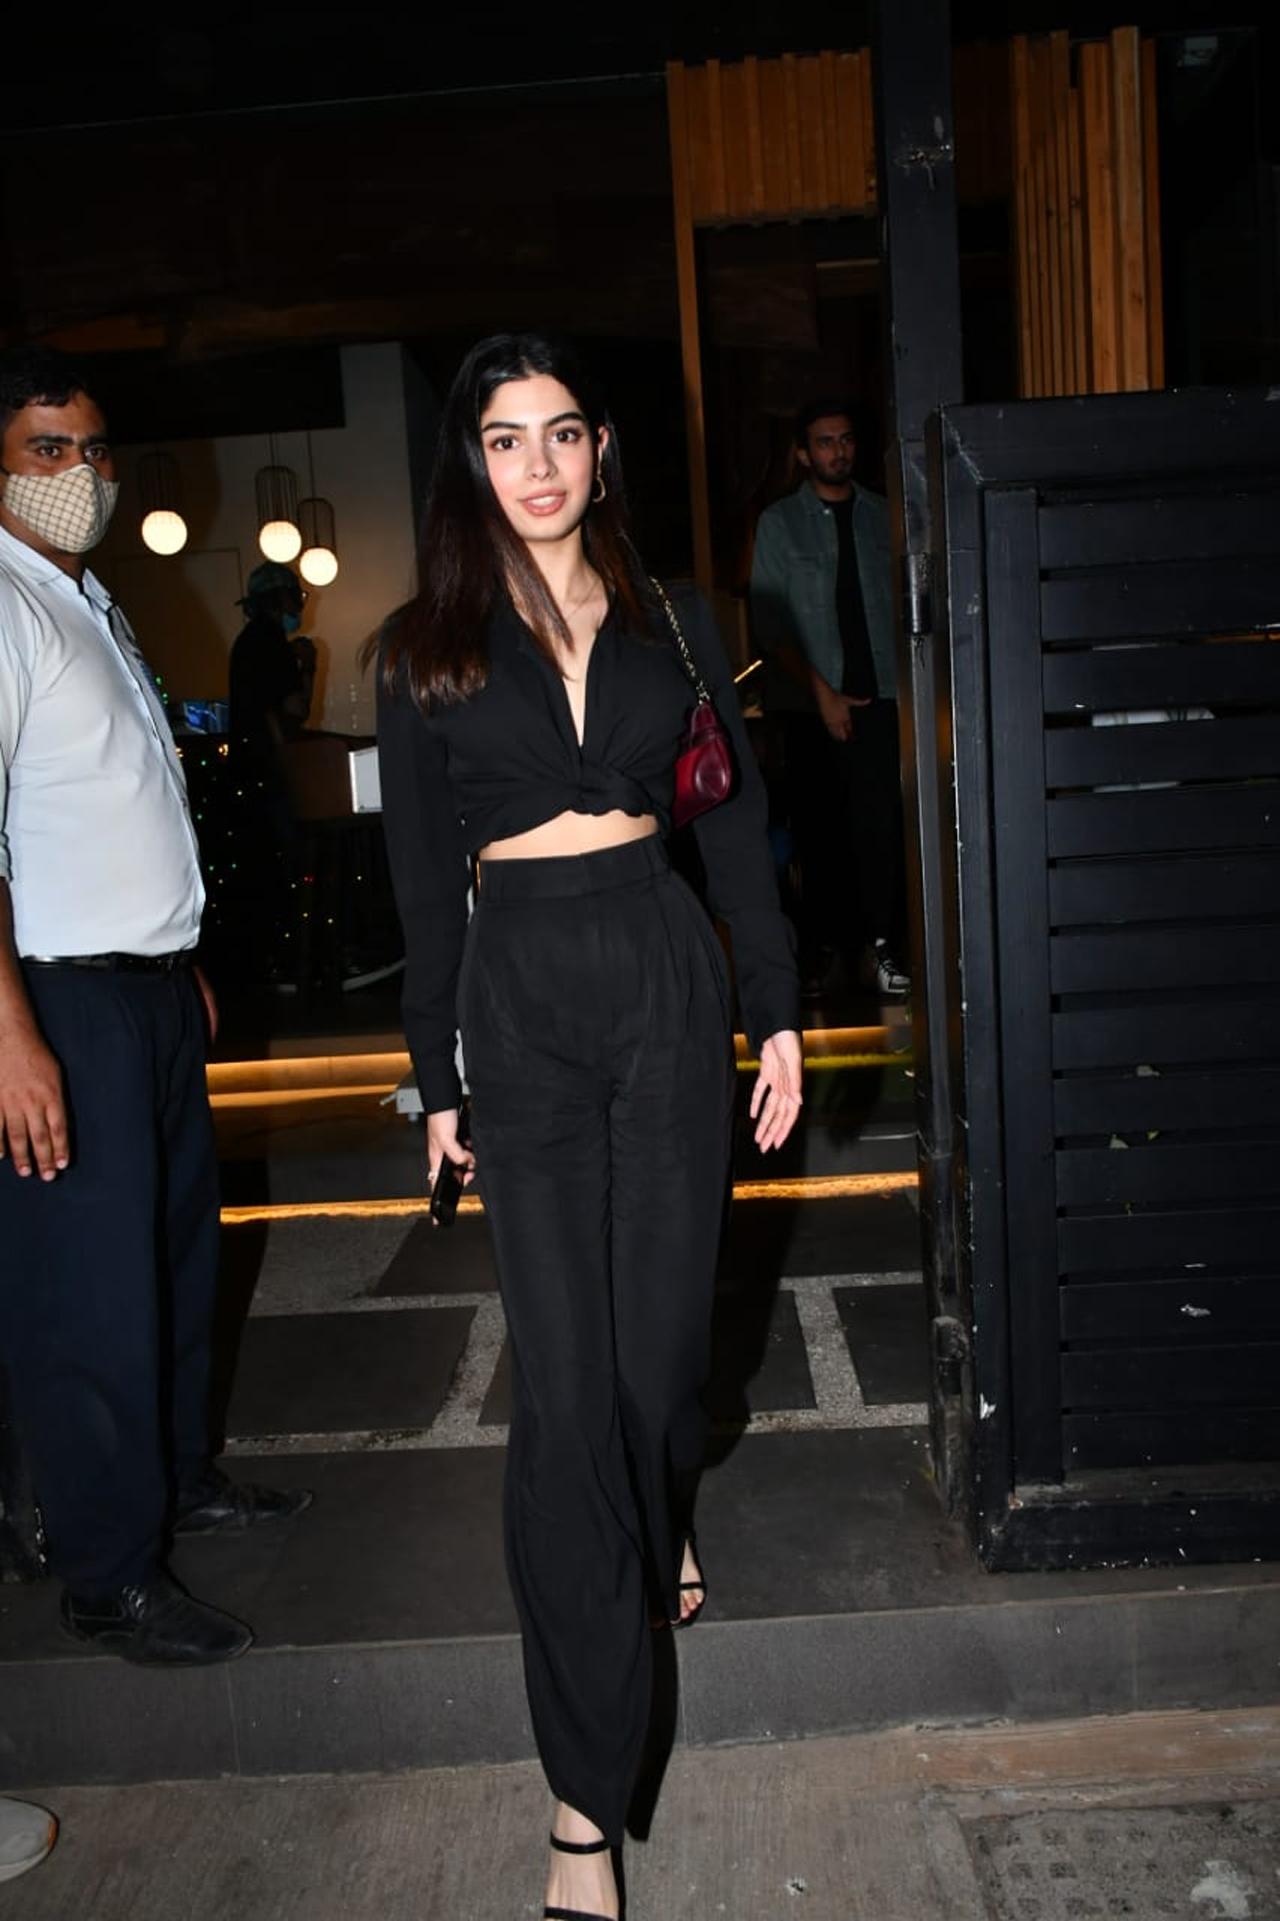 Much like their best friend Ananya, Suhana and Shanaya are also looking forward to pursuing a career in acting. Shanaya had announced last year that she will make her Bollywood debut with Karan Johar's film, while Suhana will reportedly be seen in Zoya Akhtar's Indian adaptation of the Archies comics.